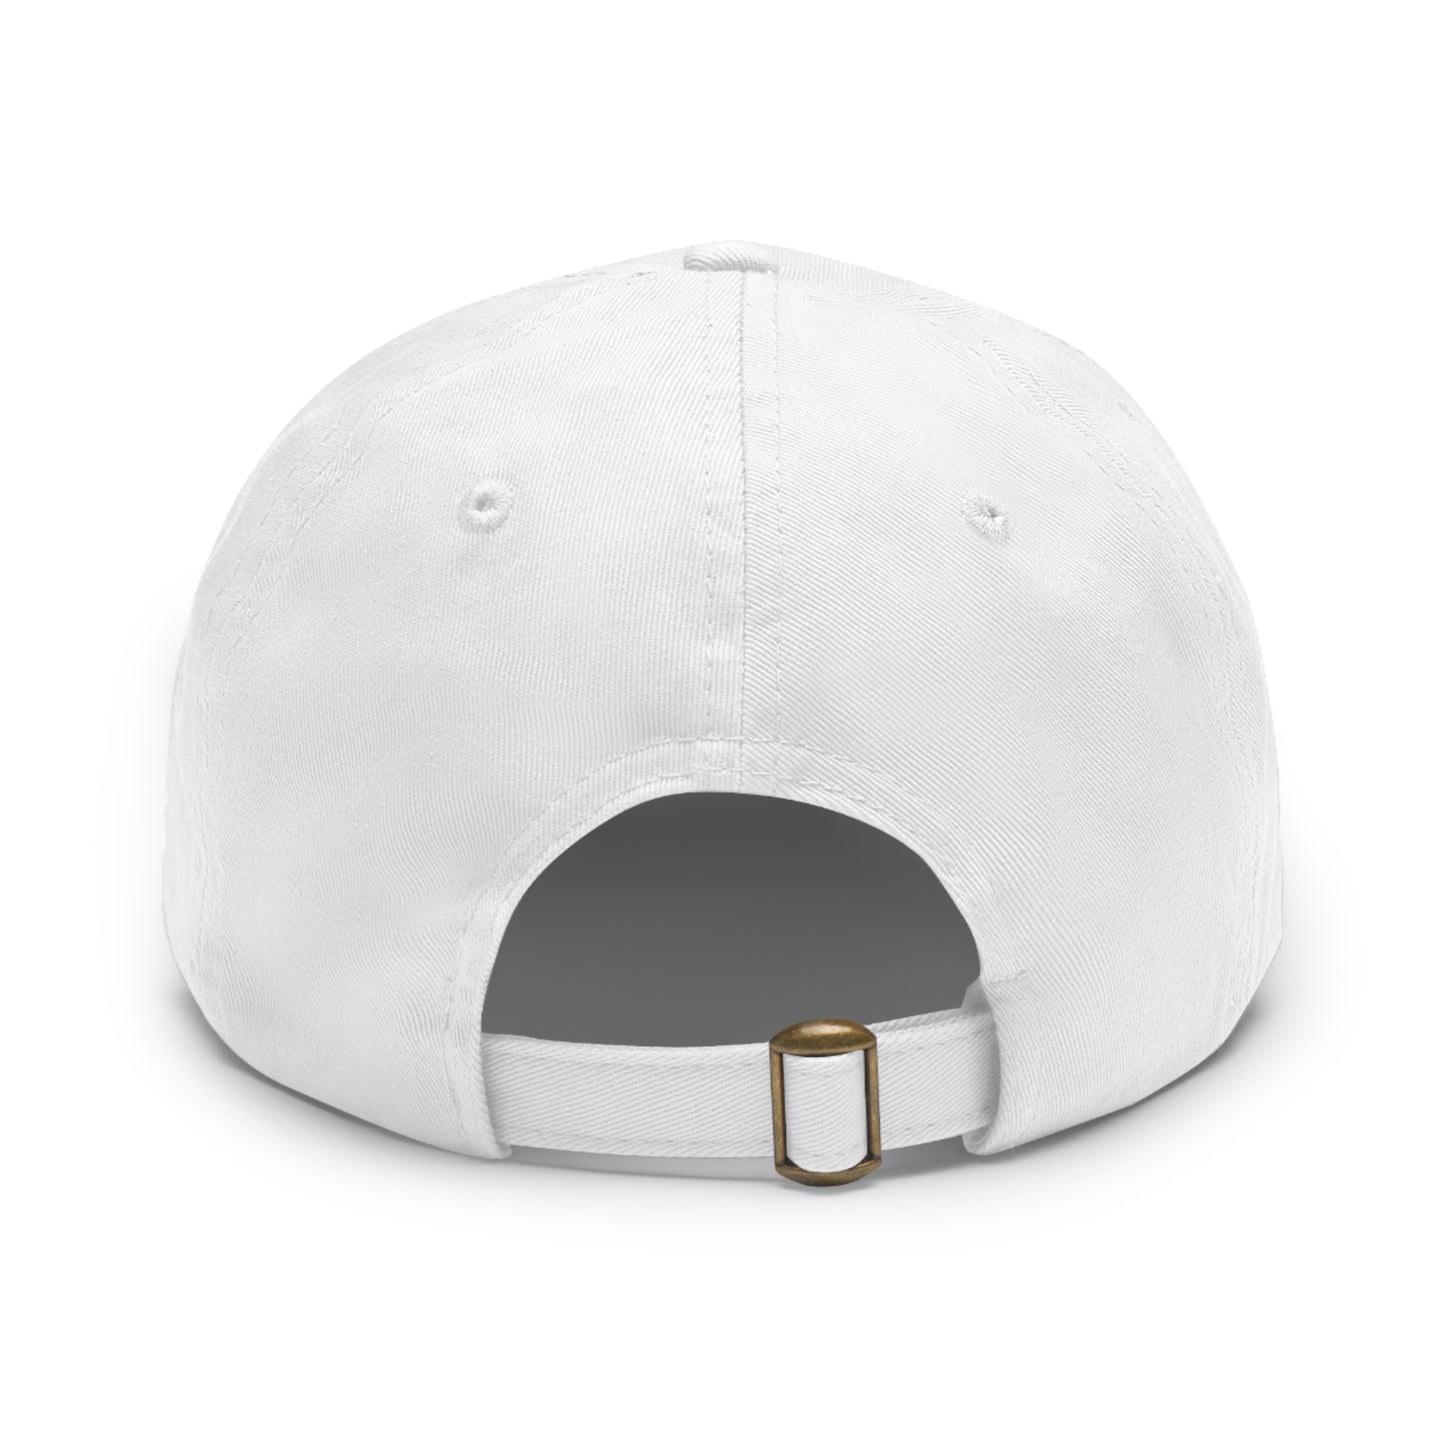 Faith Hope & Love Dad Hat with Leather emblem.